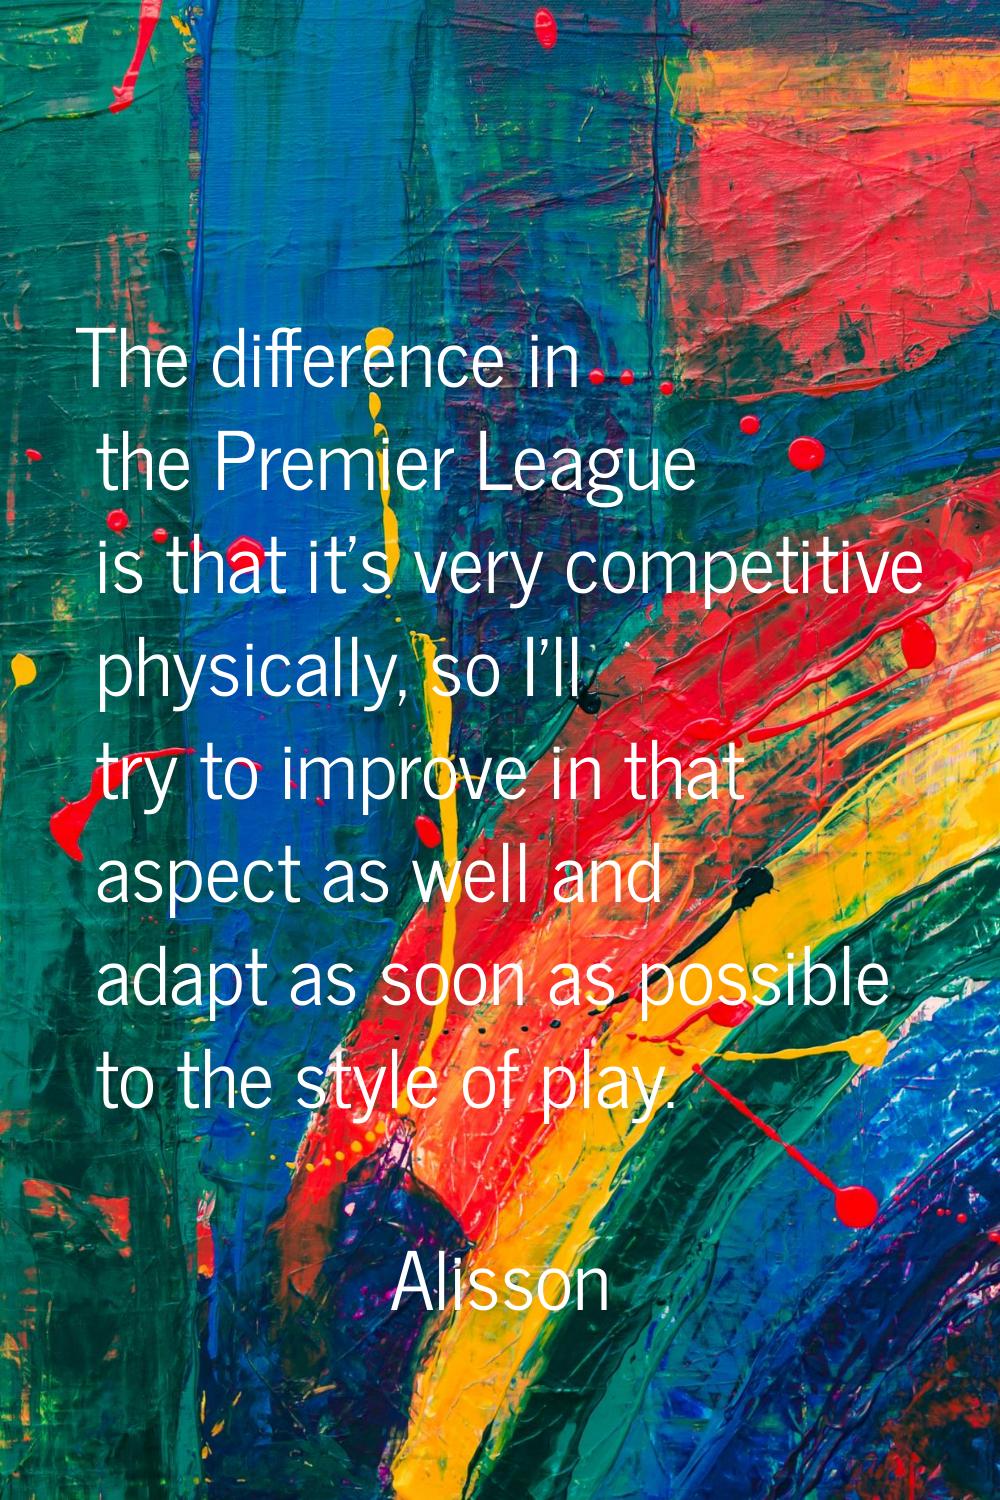 The difference in the Premier League is that it's very competitive physically, so I'll try to impro